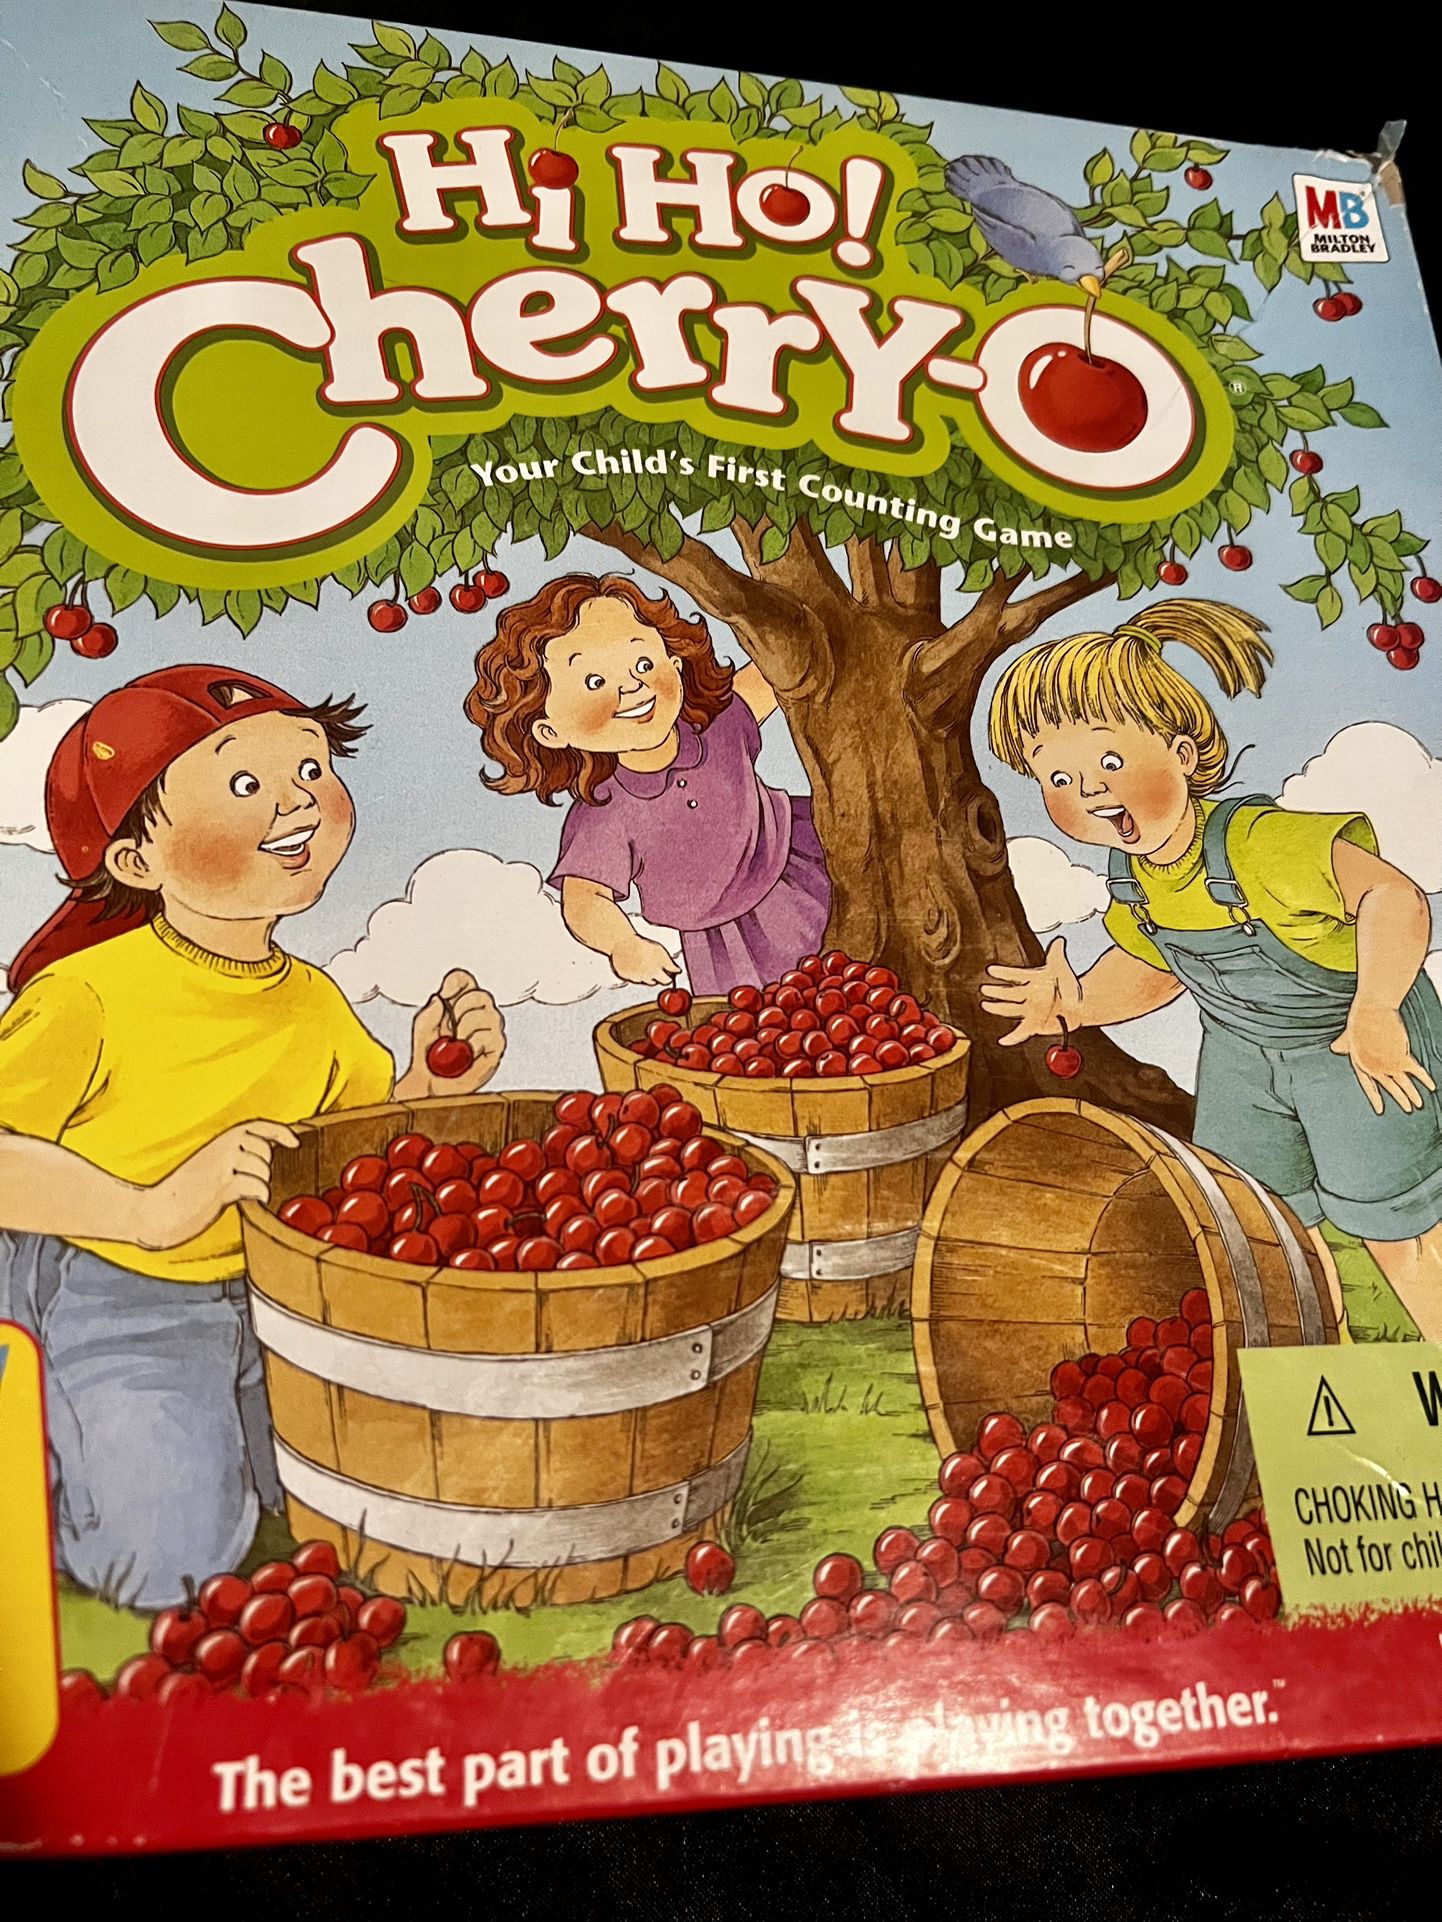 Vintage 1999 Hi Ho! Cherry-O Children’s Counting Game